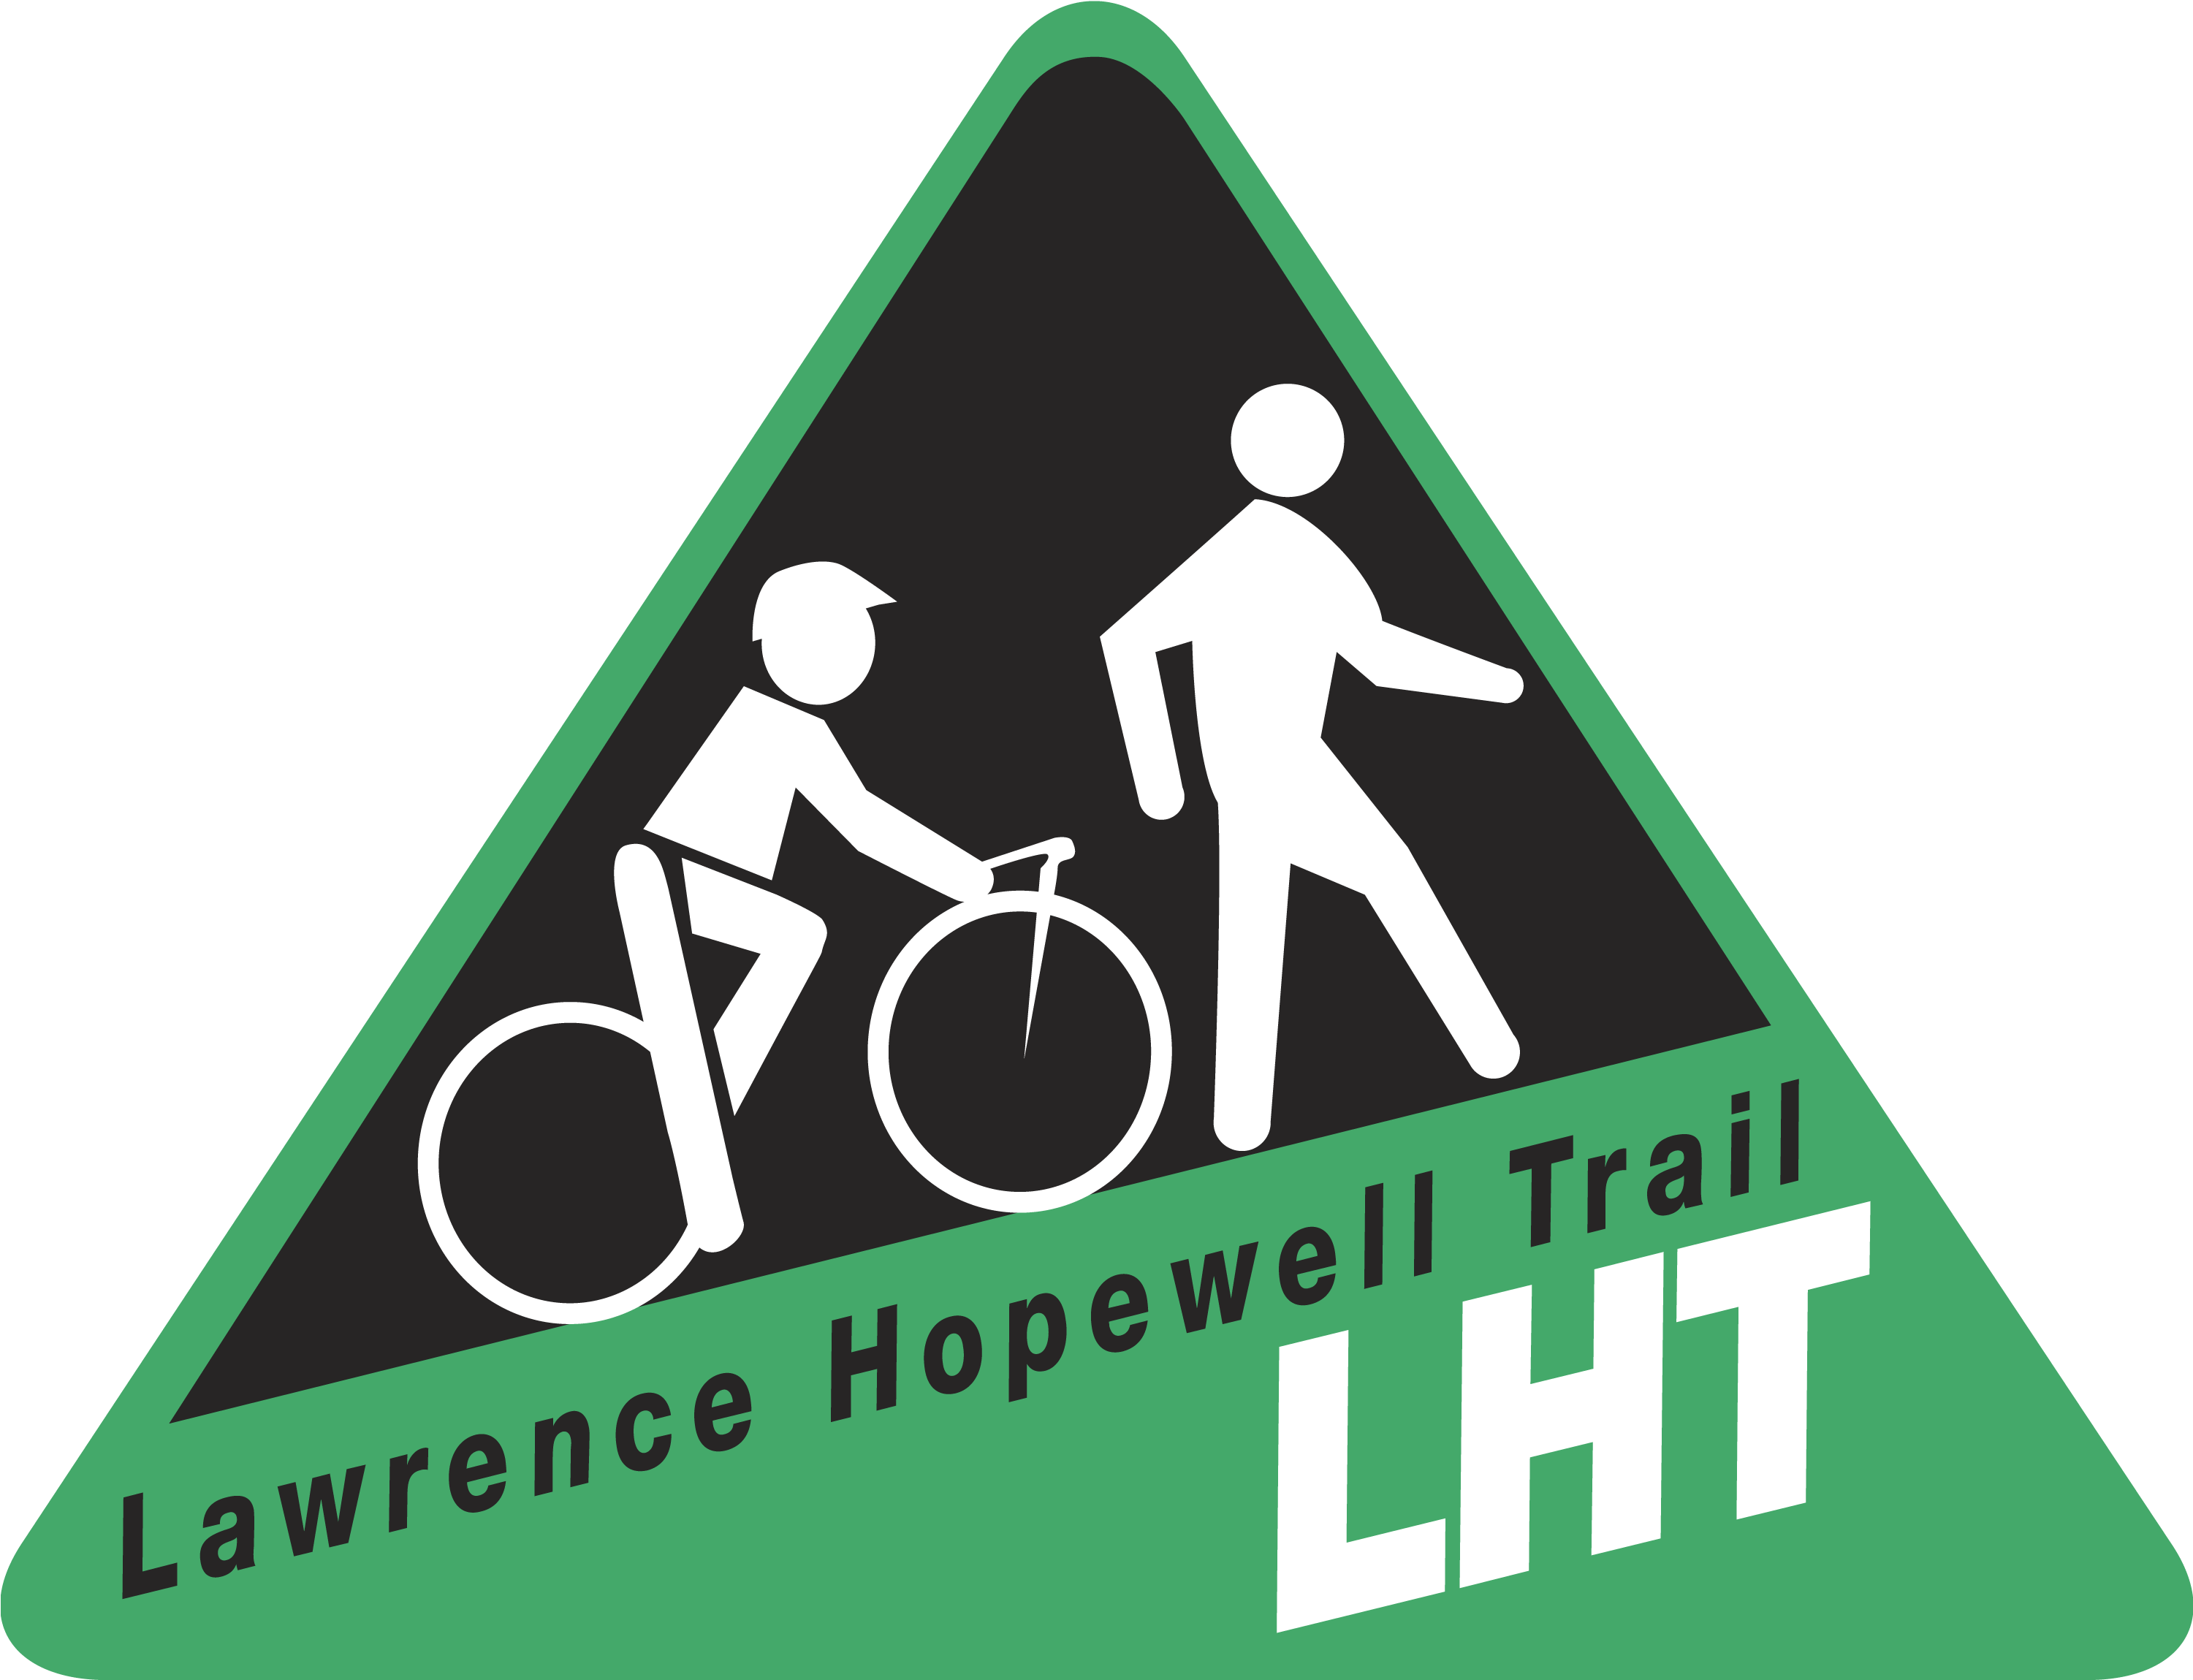 The Mission Of The Lawrence Hopewell Trail Is To Enhance - Lawrence Hopewell Trail (3000x2323)